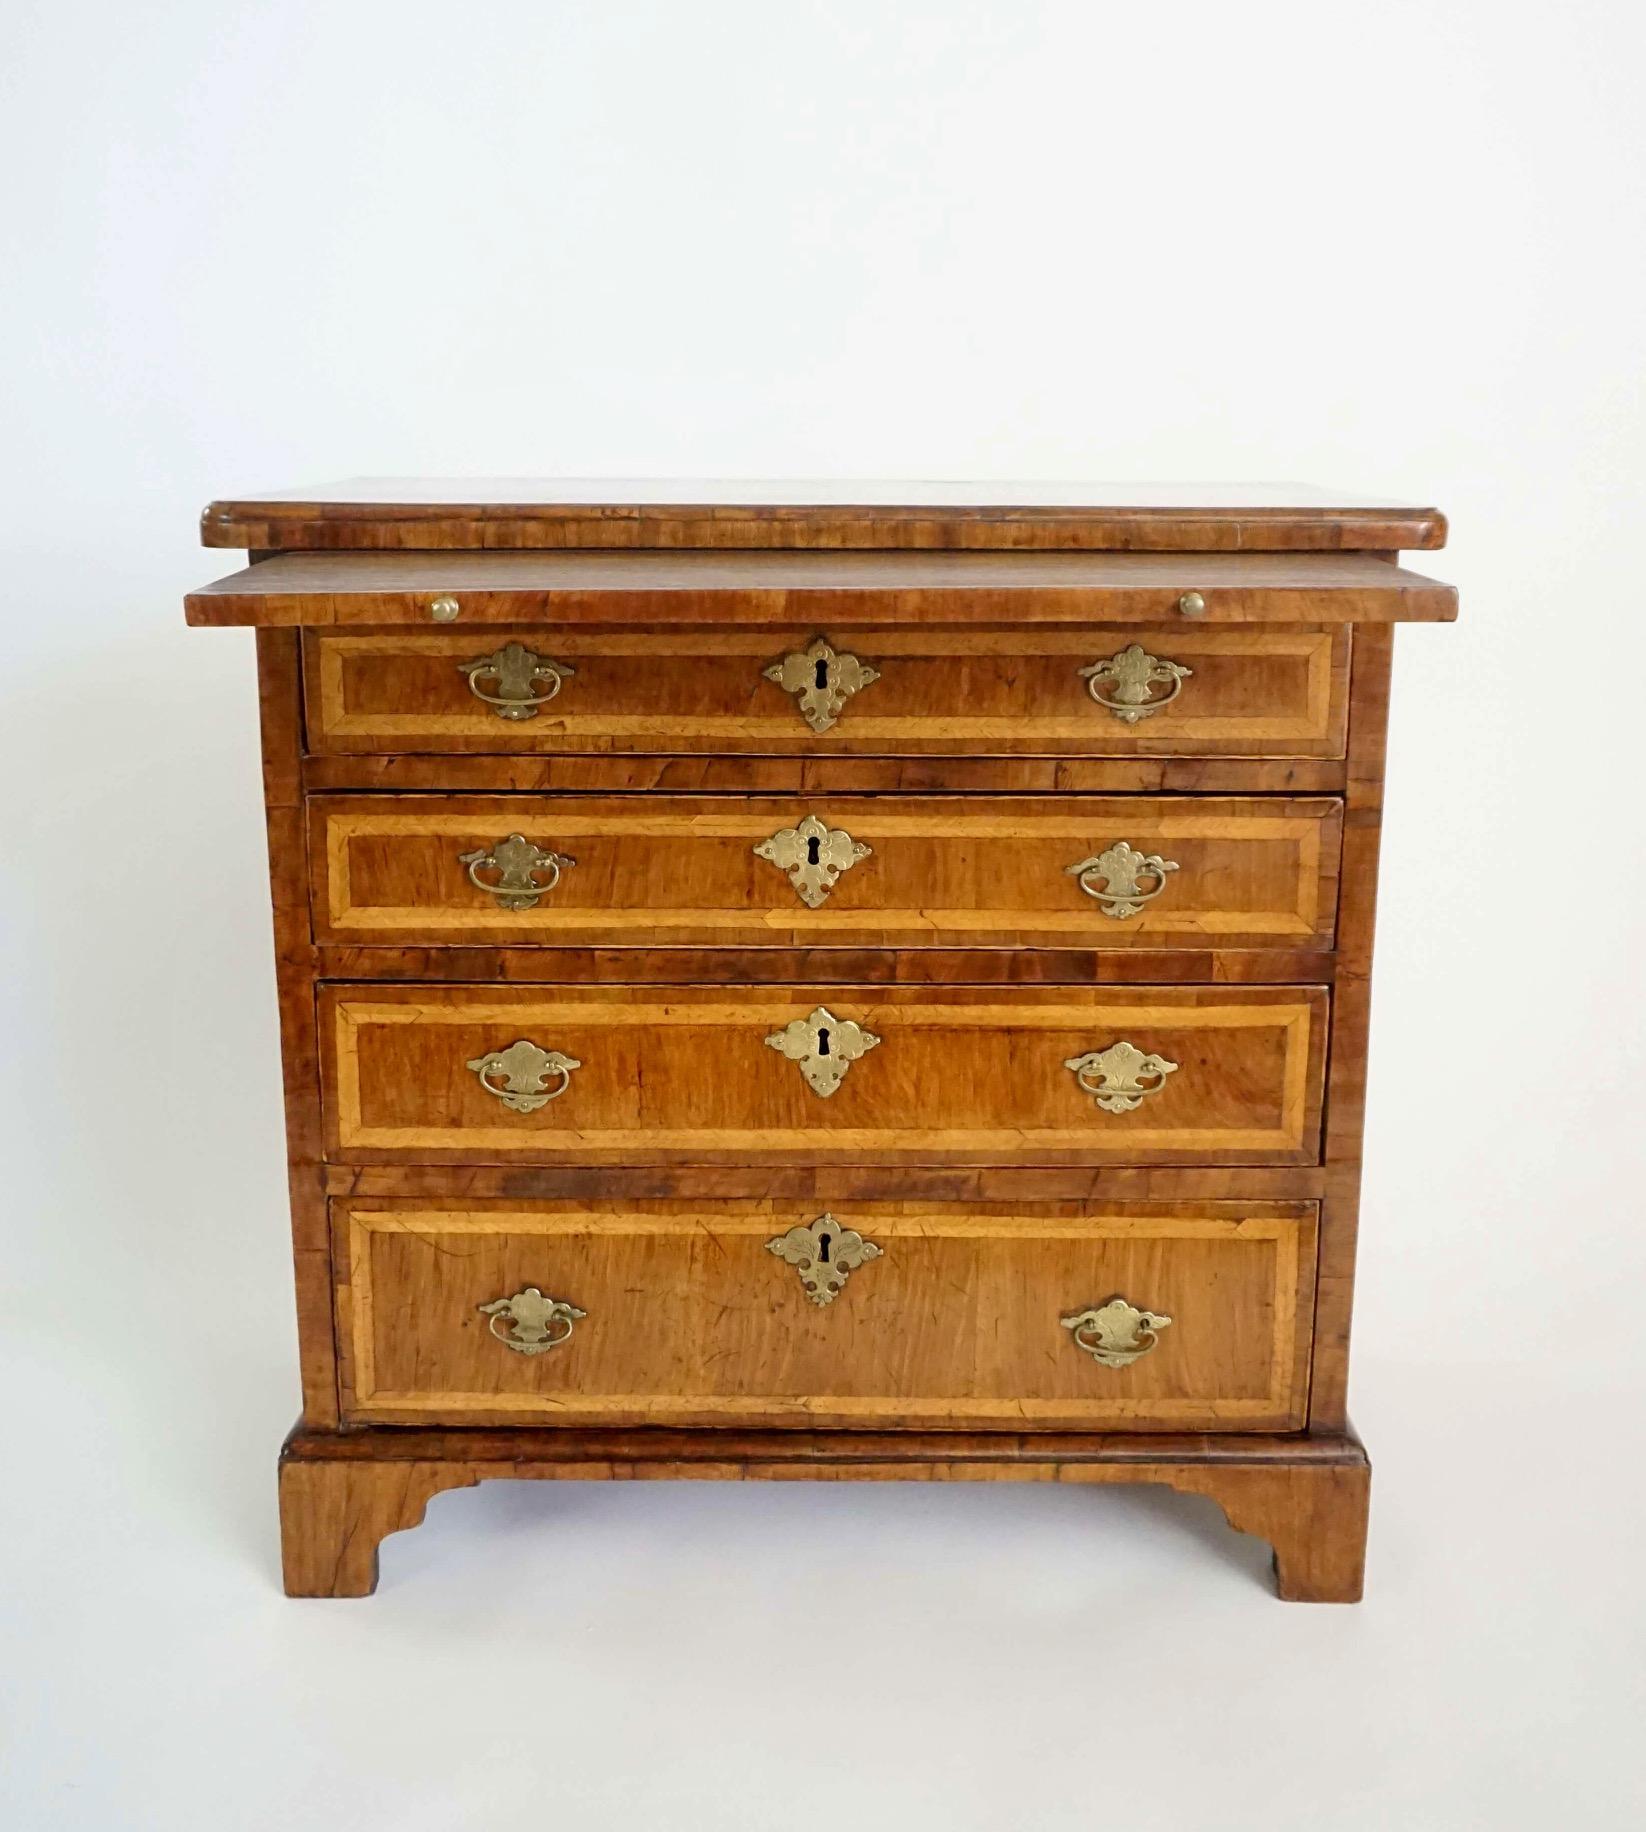 English Walnut and Satinwood Inlaid Petite Chest or Bachelor's Chest, circa 1715 For Sale 1